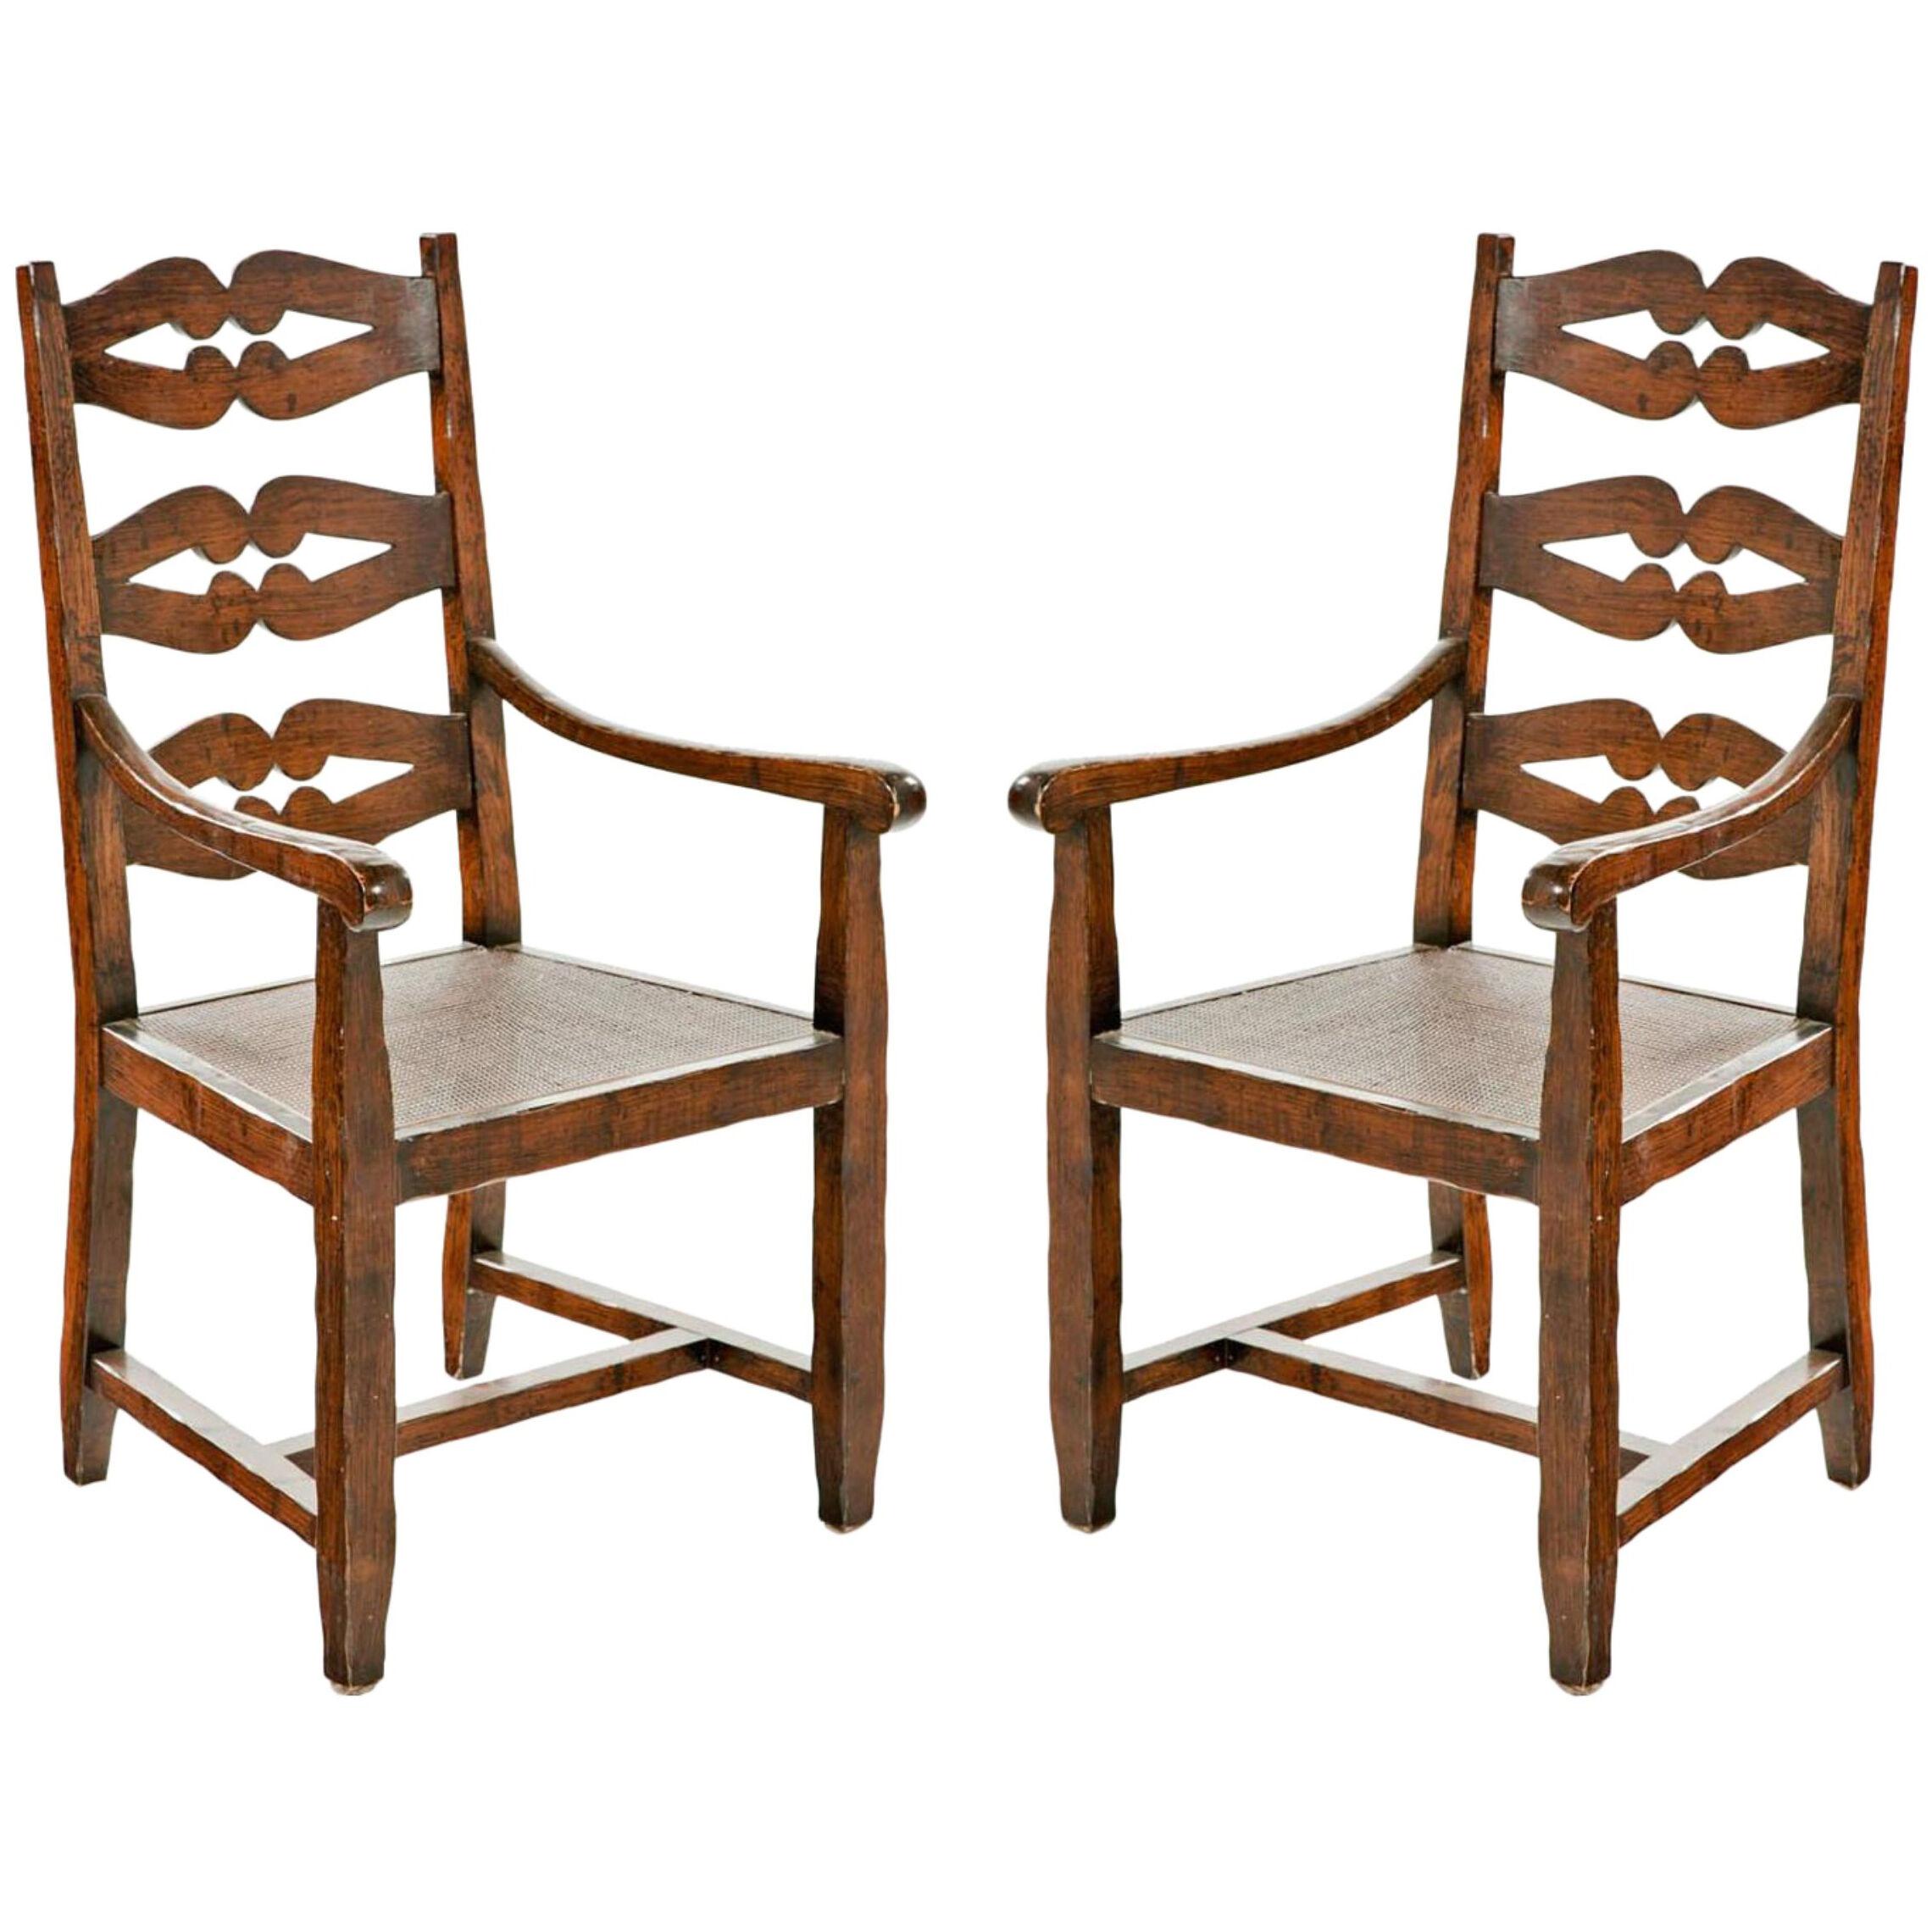 English Ladderback Arm Chairs with Caning - a Pair